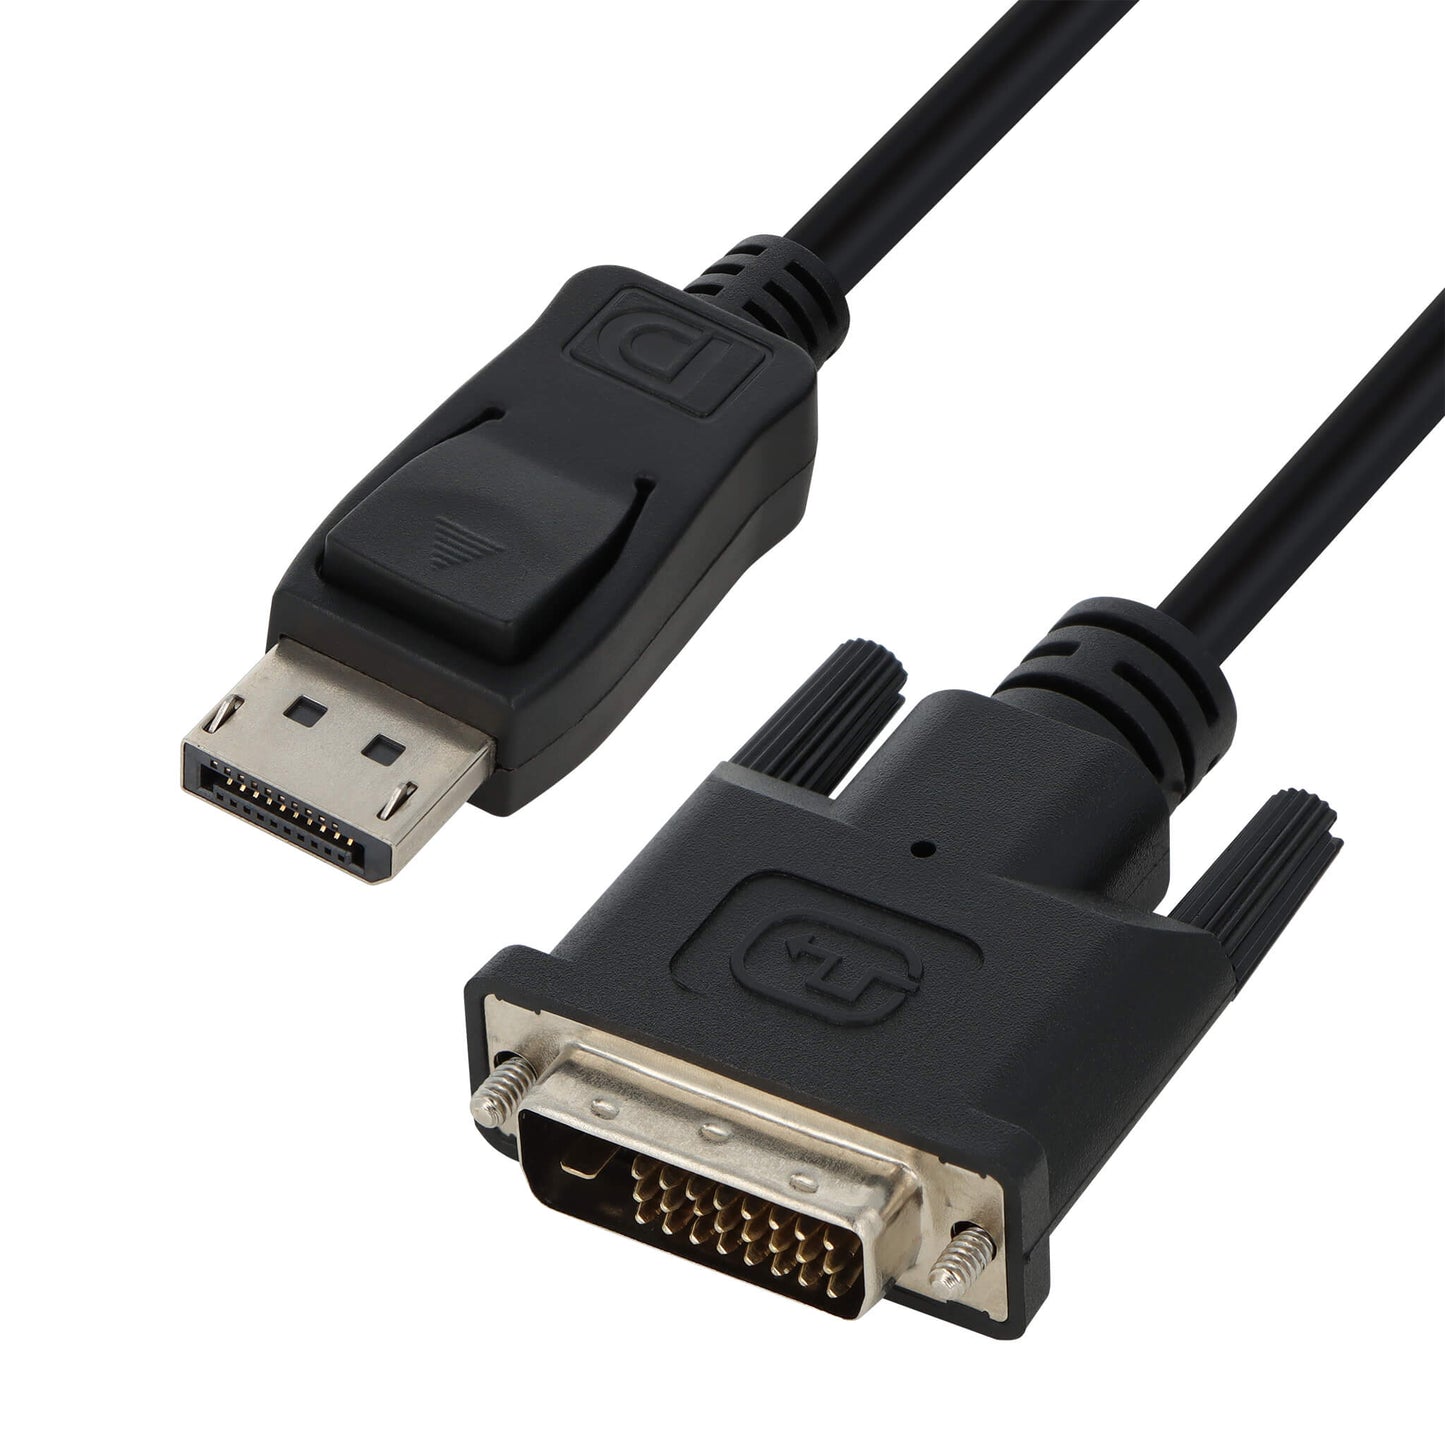 What's the Difference Between Passive and Active DisplayPort Adapters?